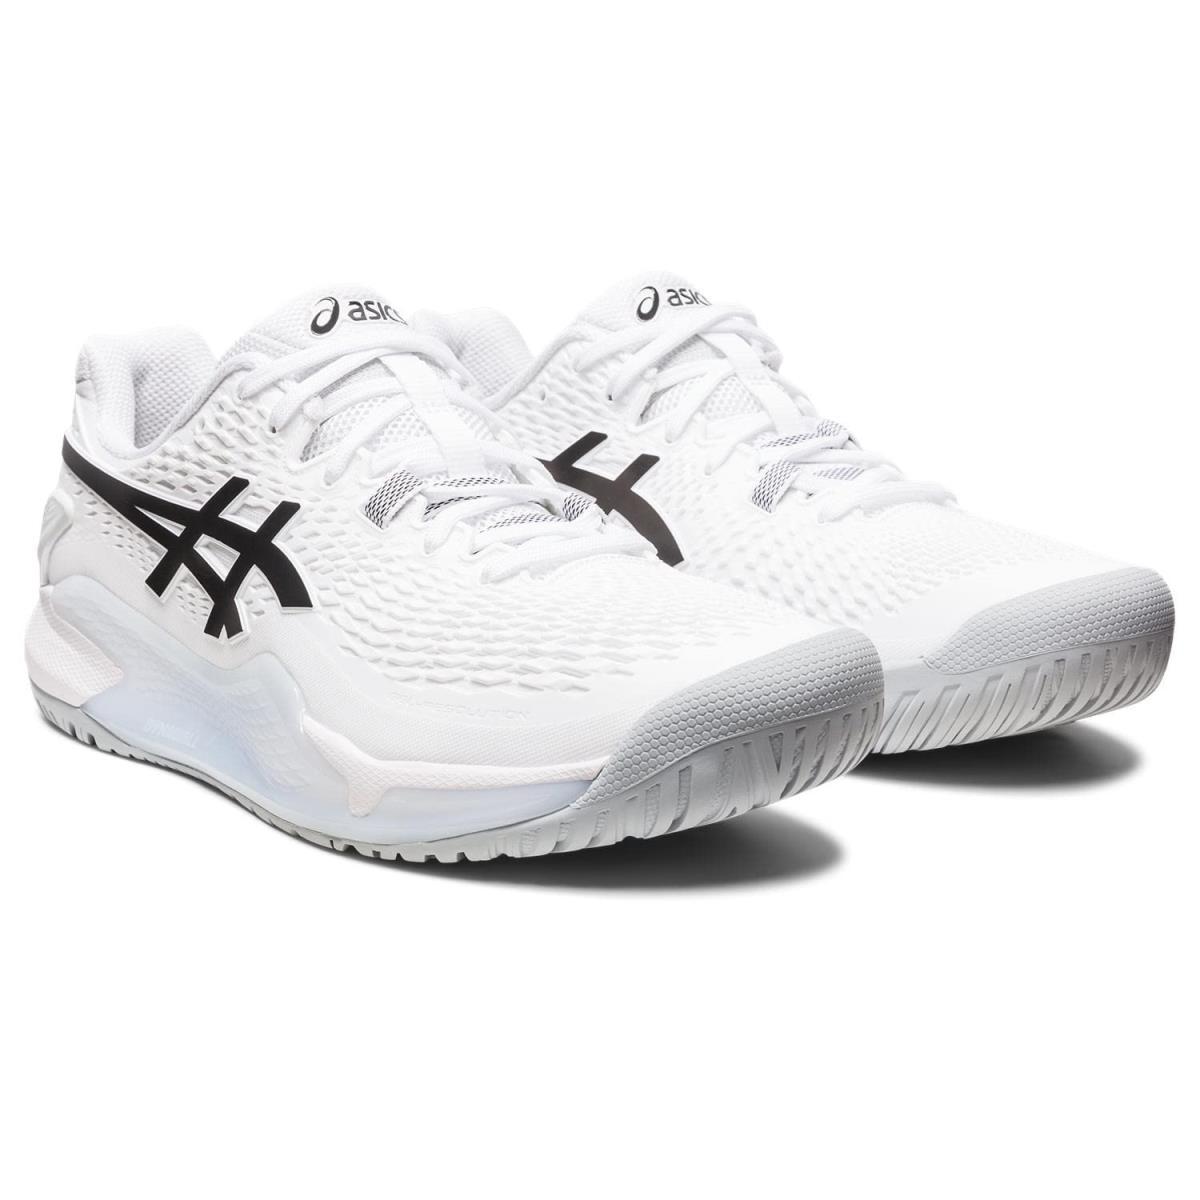 Man`s Sneakers Athletic Shoes Asics Gel-resolution 9 White/Black